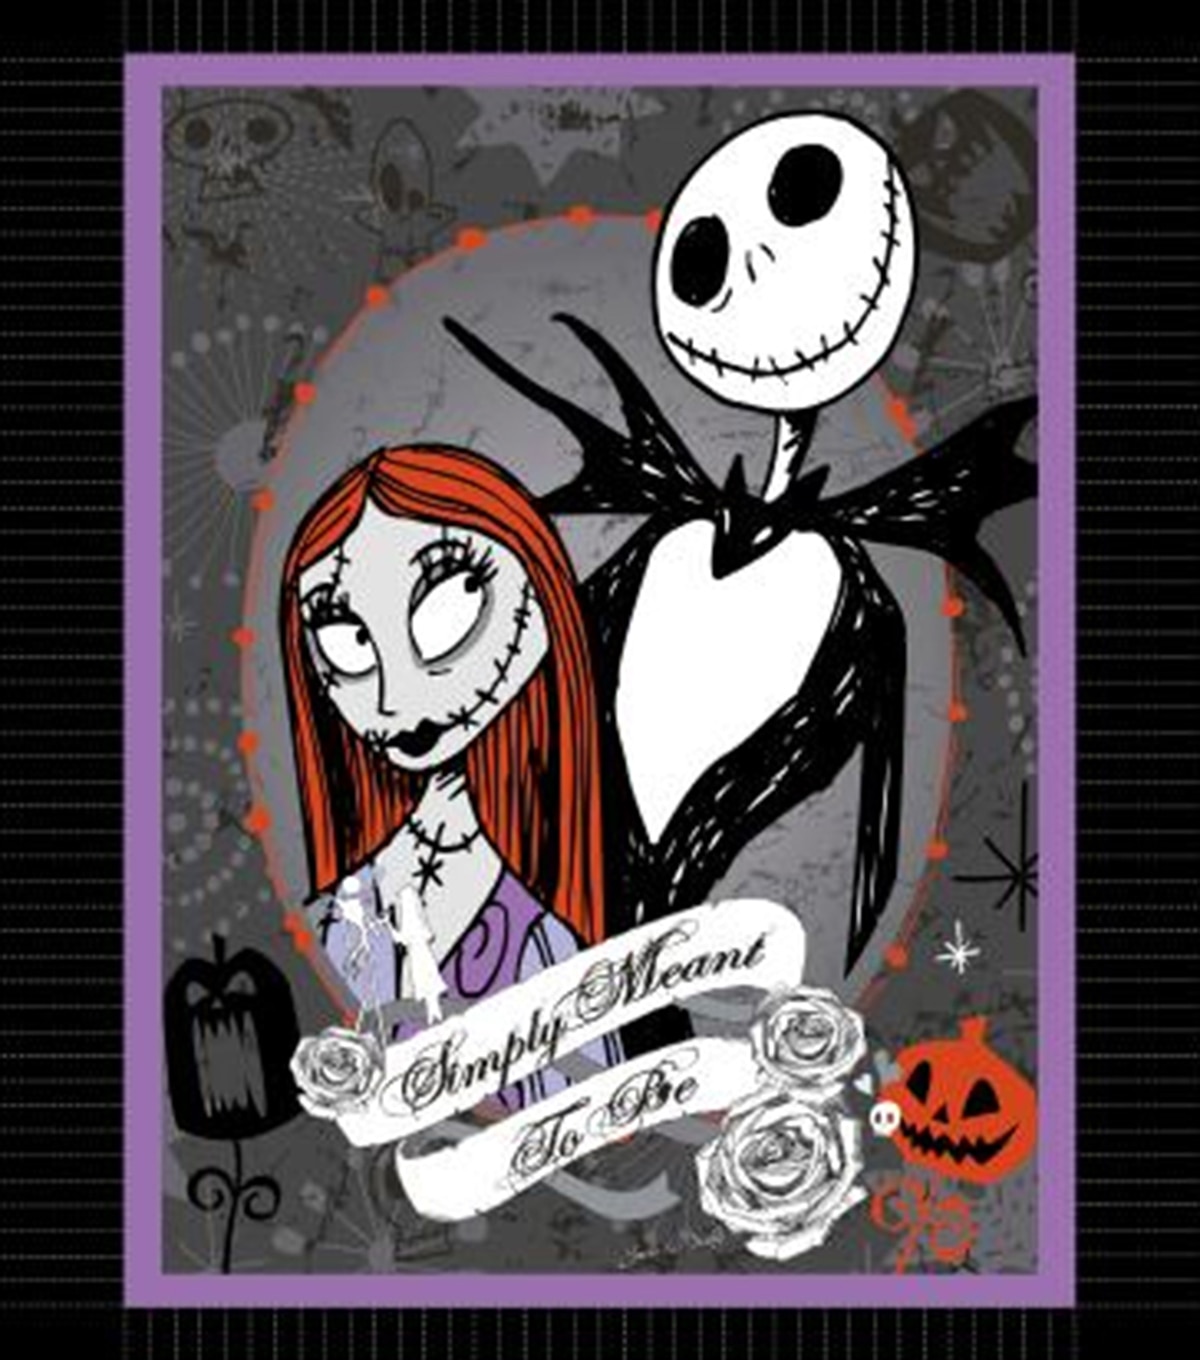 Happy Birthday Images Nightmare Before Christmas : Future fantasy pin